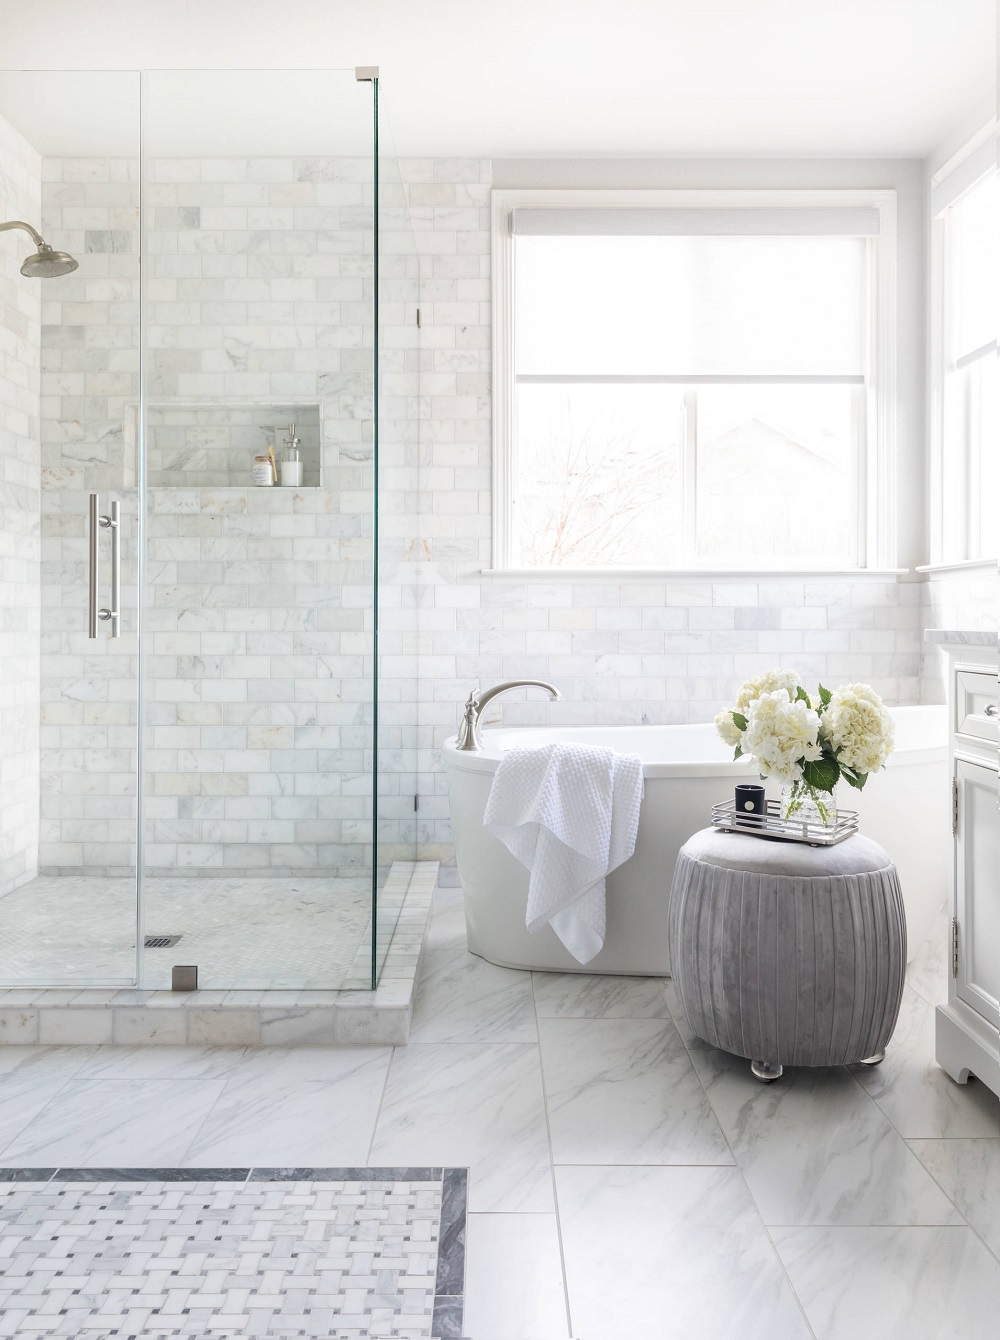 wb7 Walk-in shower ideas and tips for having one (cost, size, and more)